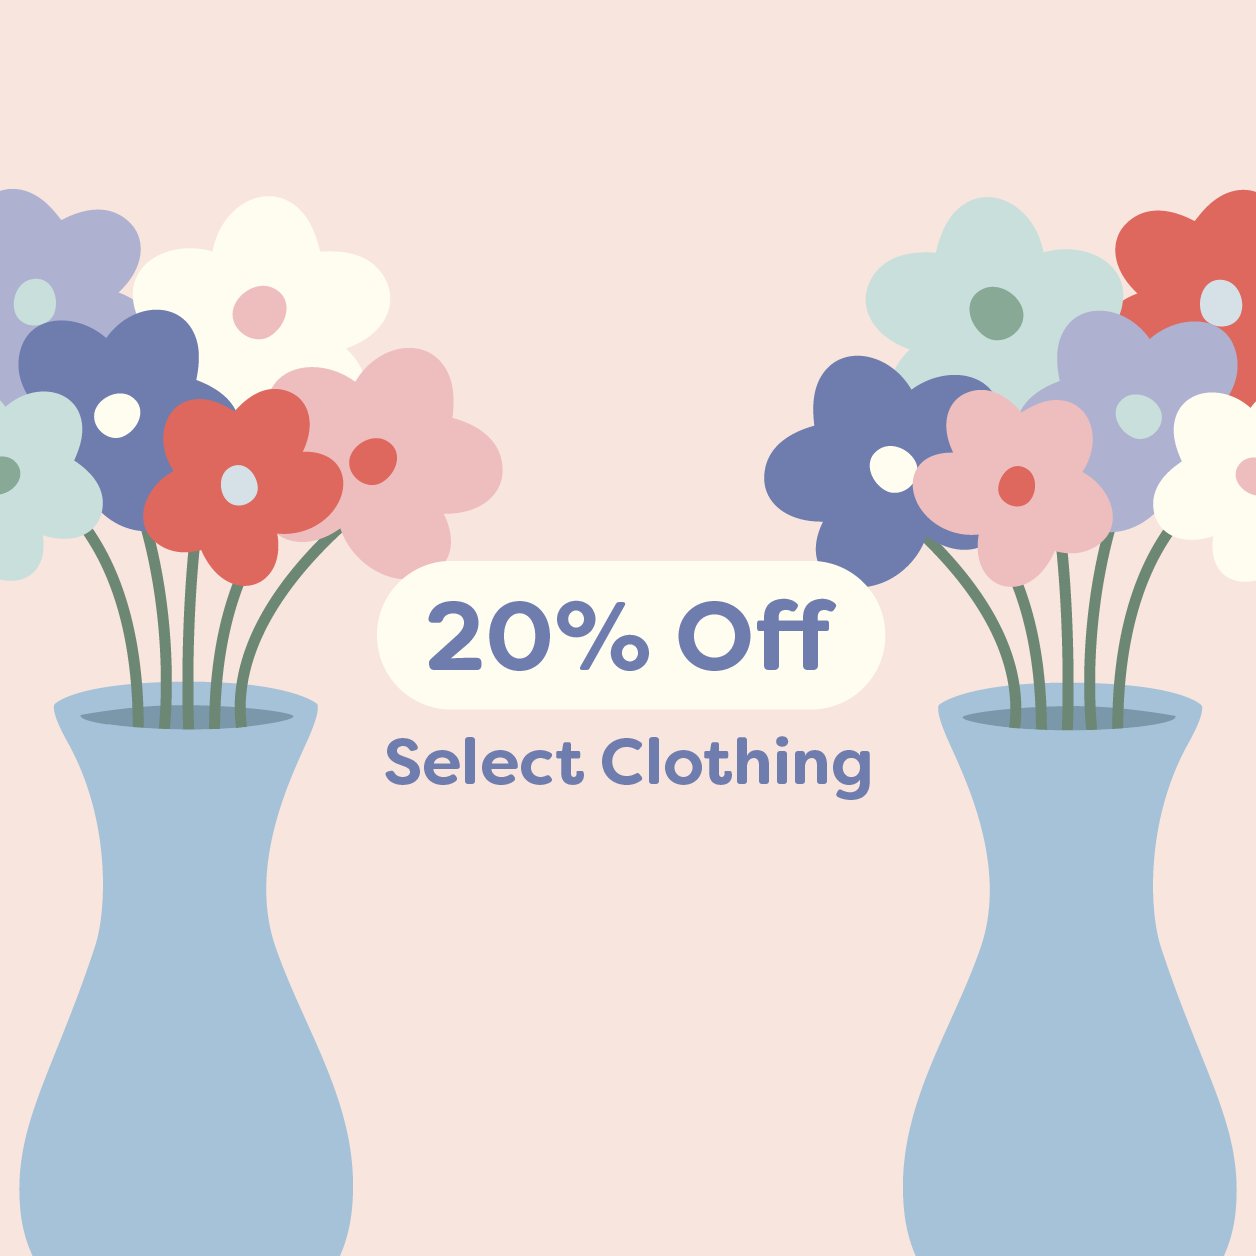 20% Off Select Clothing